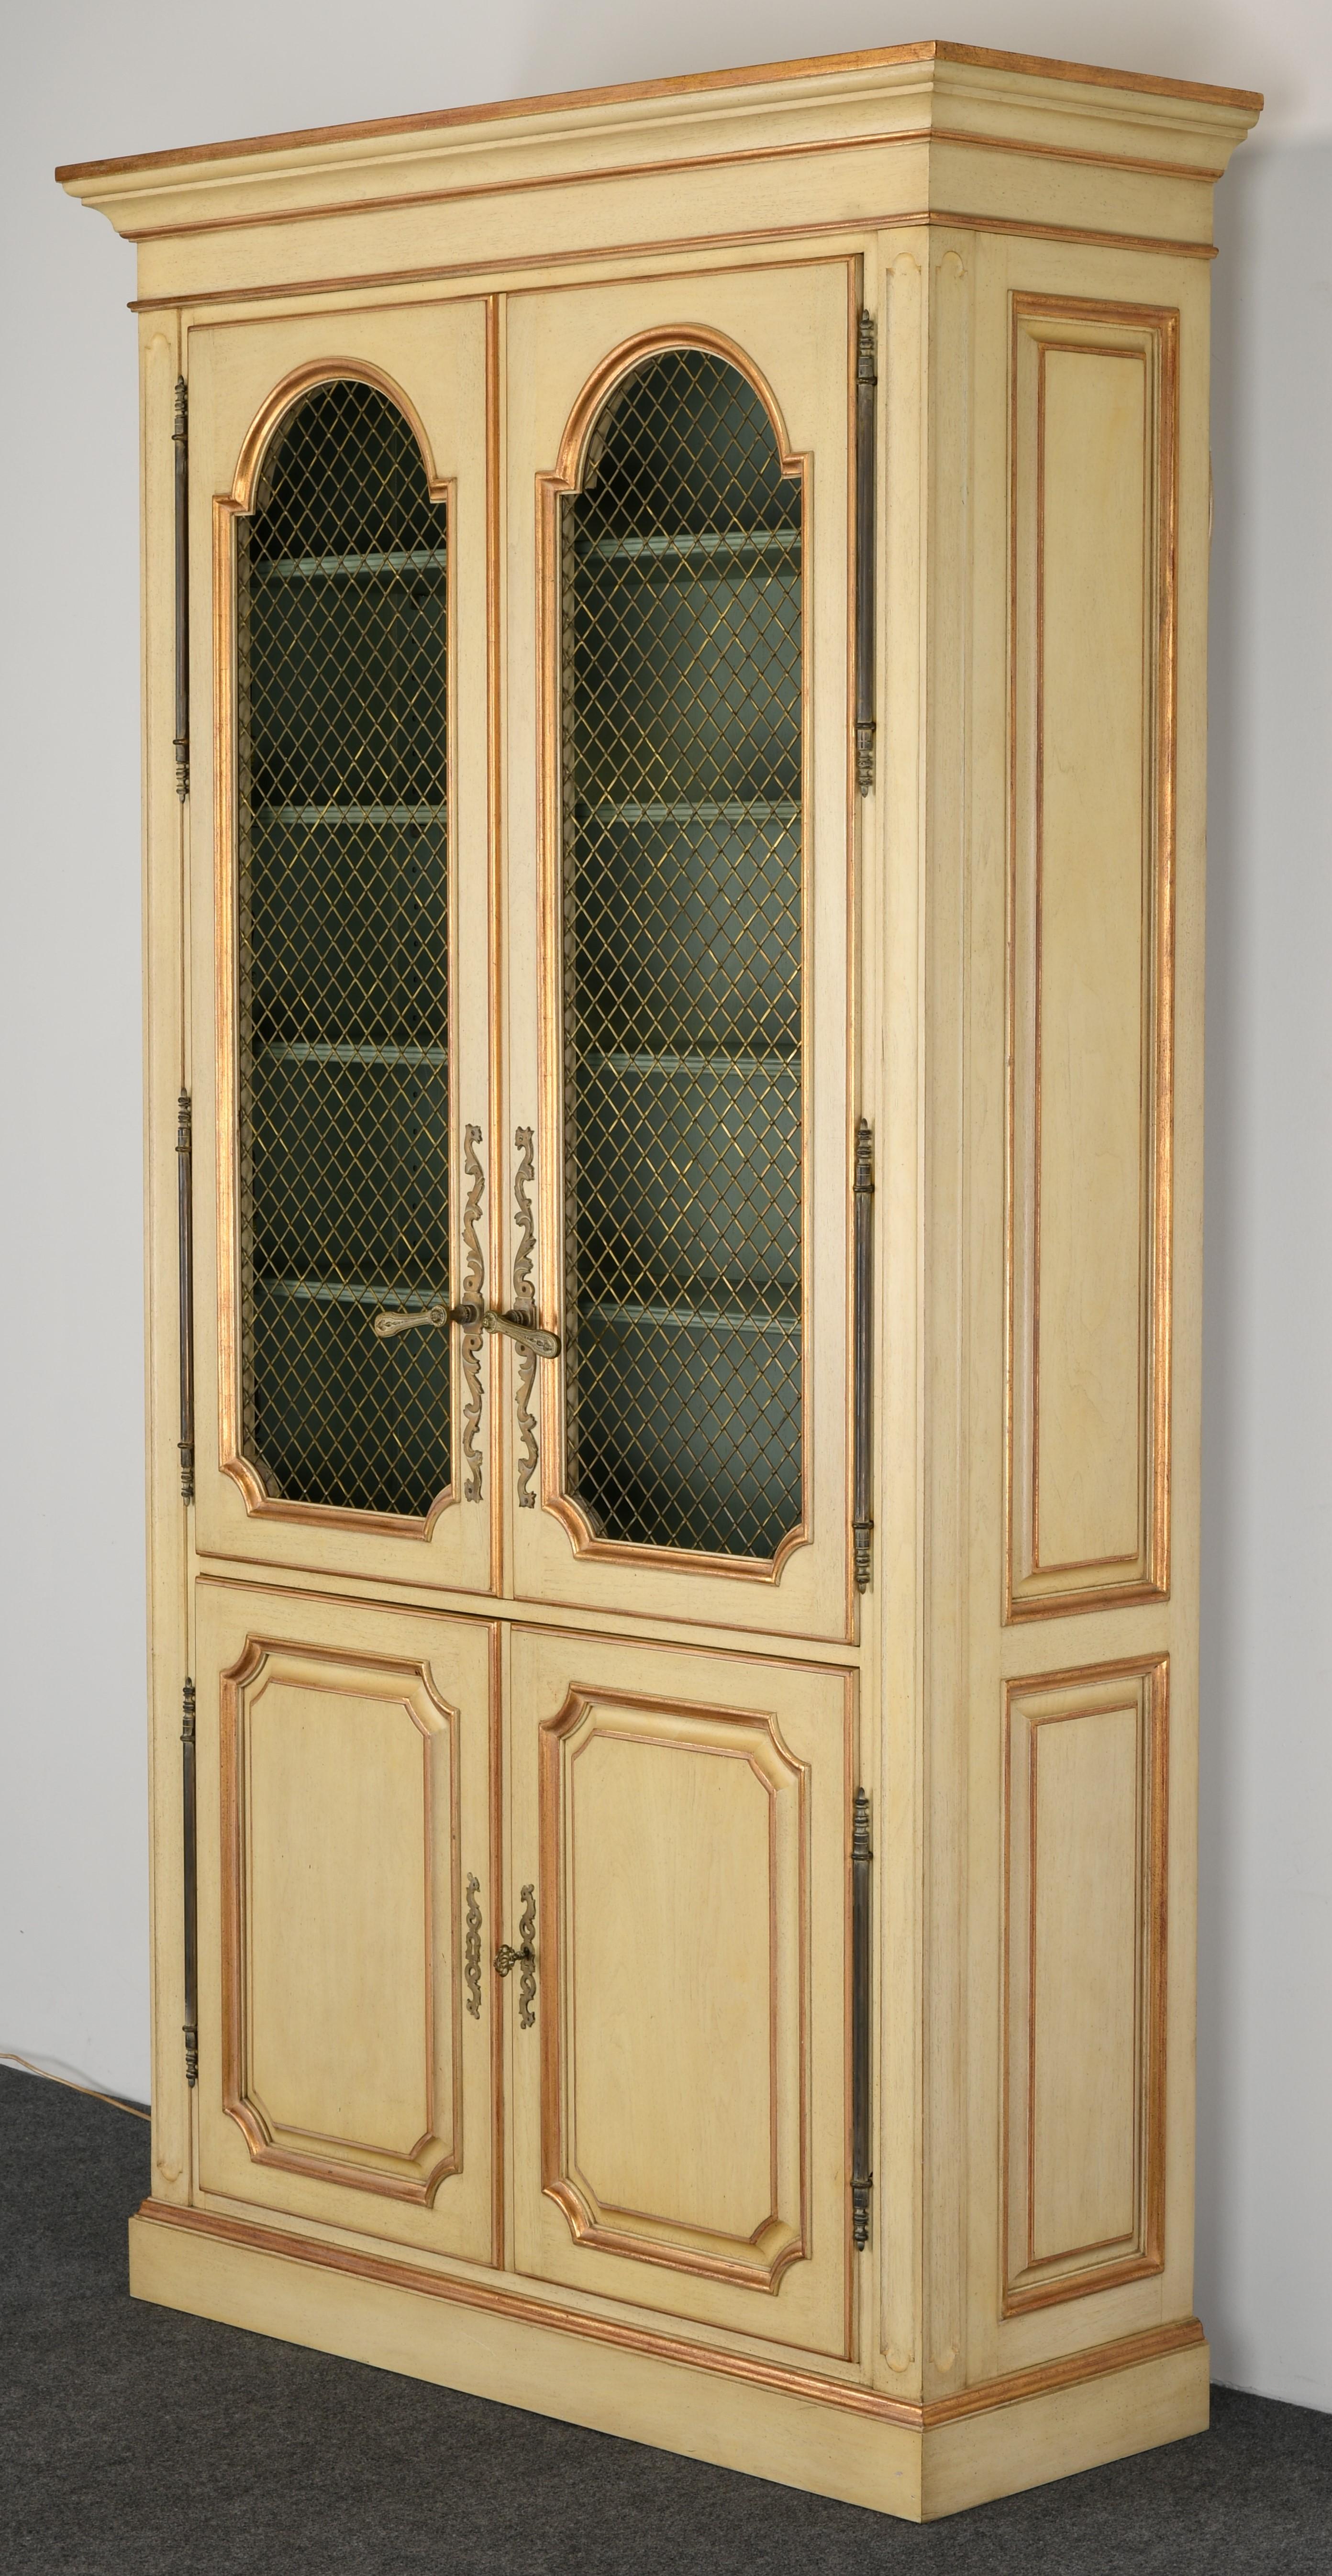 A stately French Provincial or country French display cabinet. This vitrine has decorative arched windows with bronze mesh wire fronts. The cabinet has seven shelves, five of which are painted a beautiful sage green. This display case lights up as